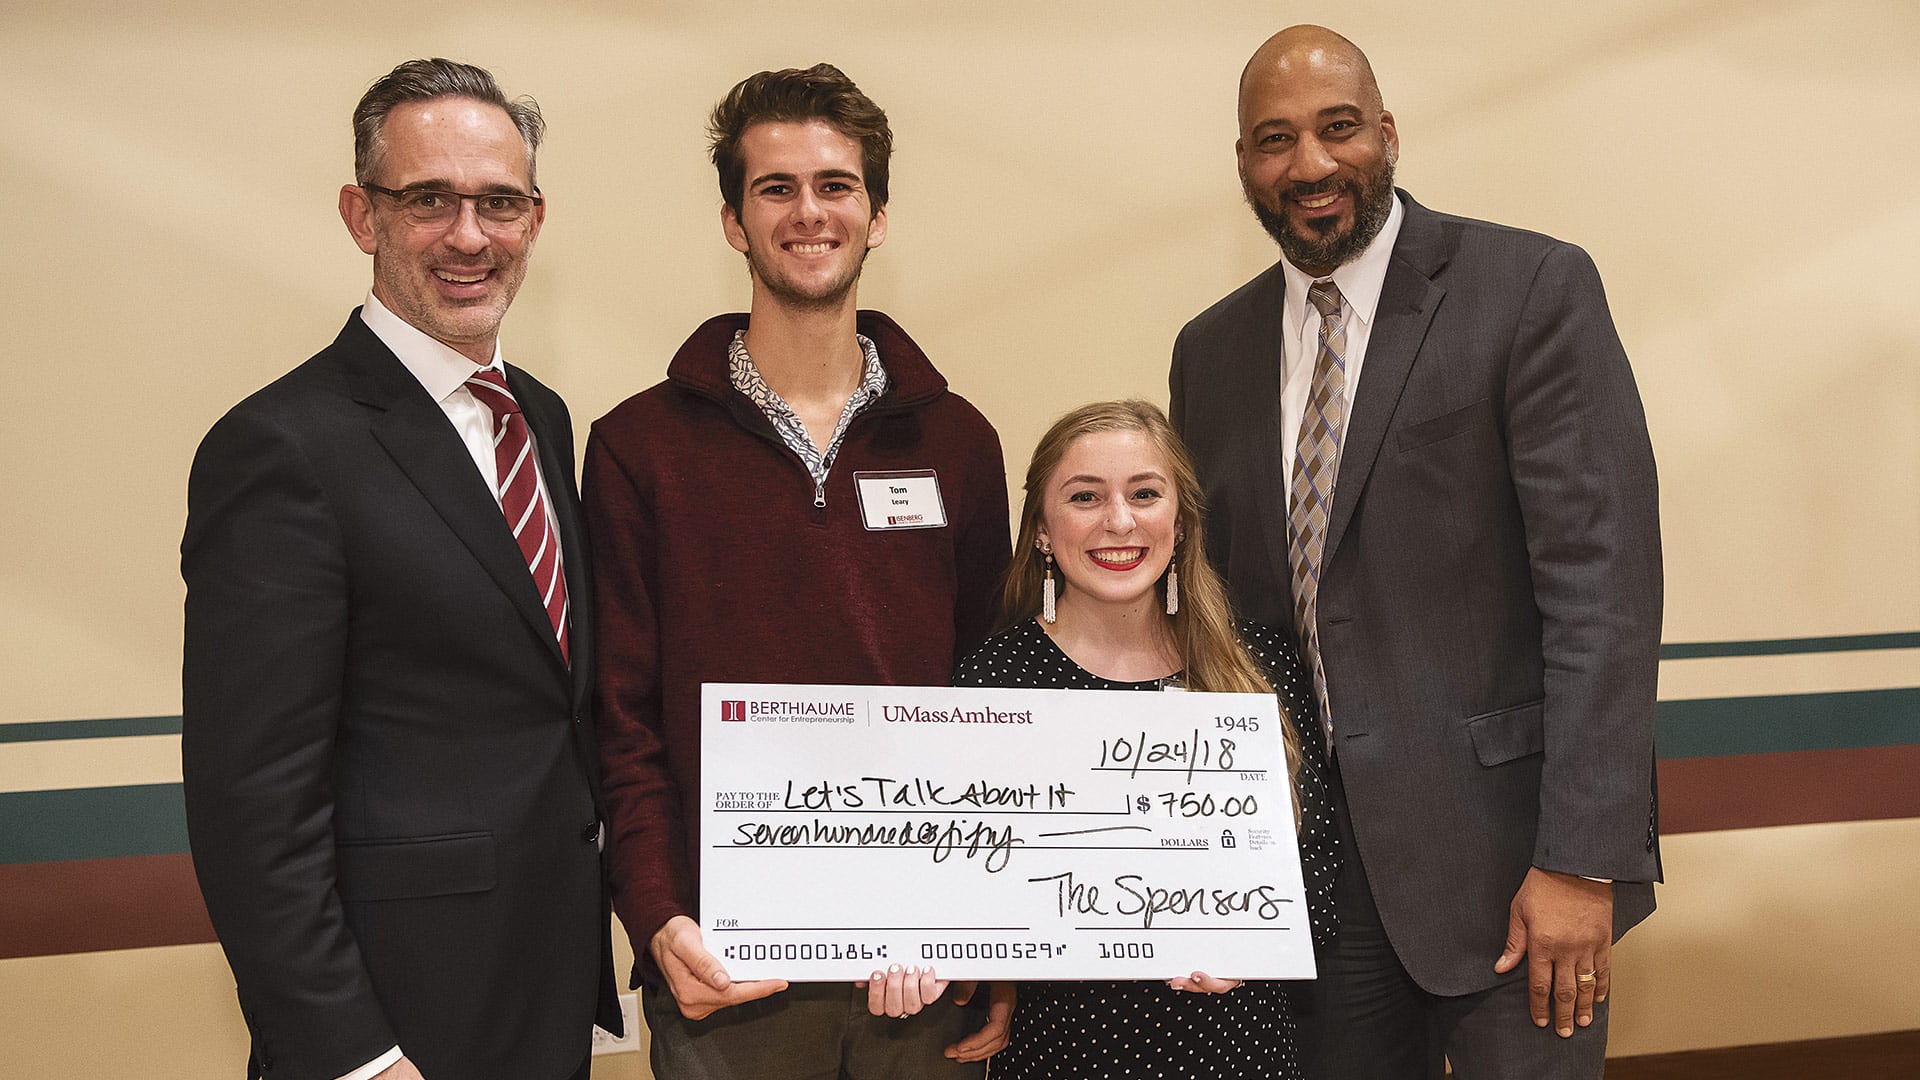 Thomas Leary and Ashley OIafsen took second prize in last month’s Minute Pitch.